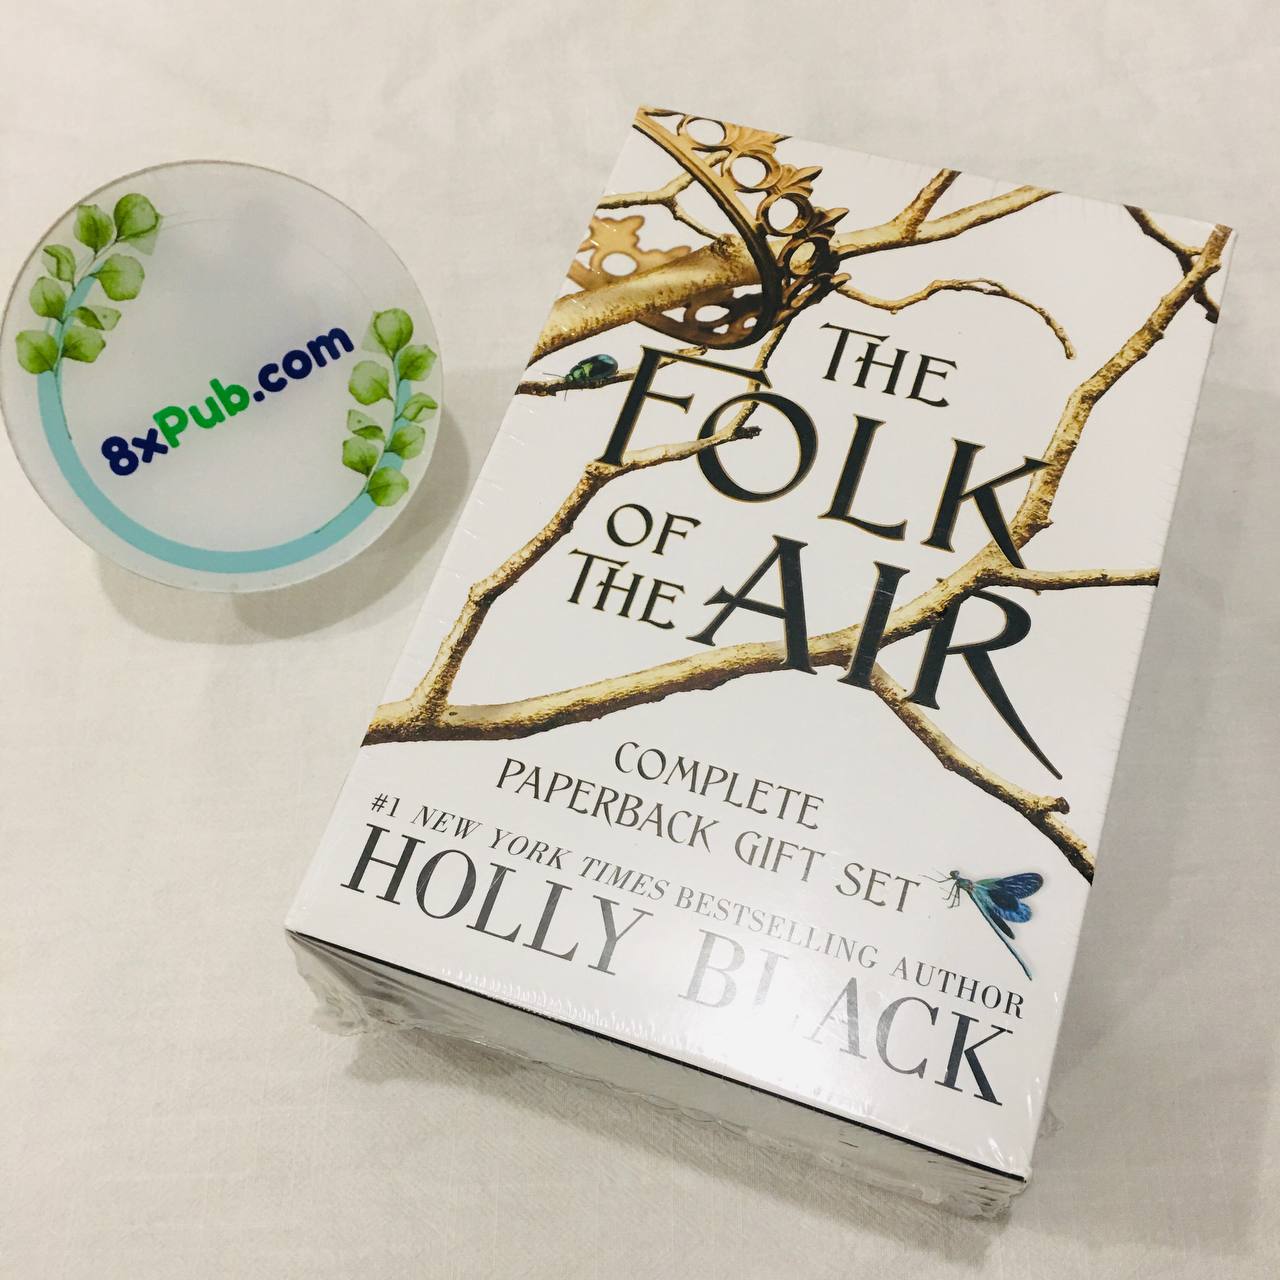 The Folk of the Air Complete Paperback Gift Set (Paperback)